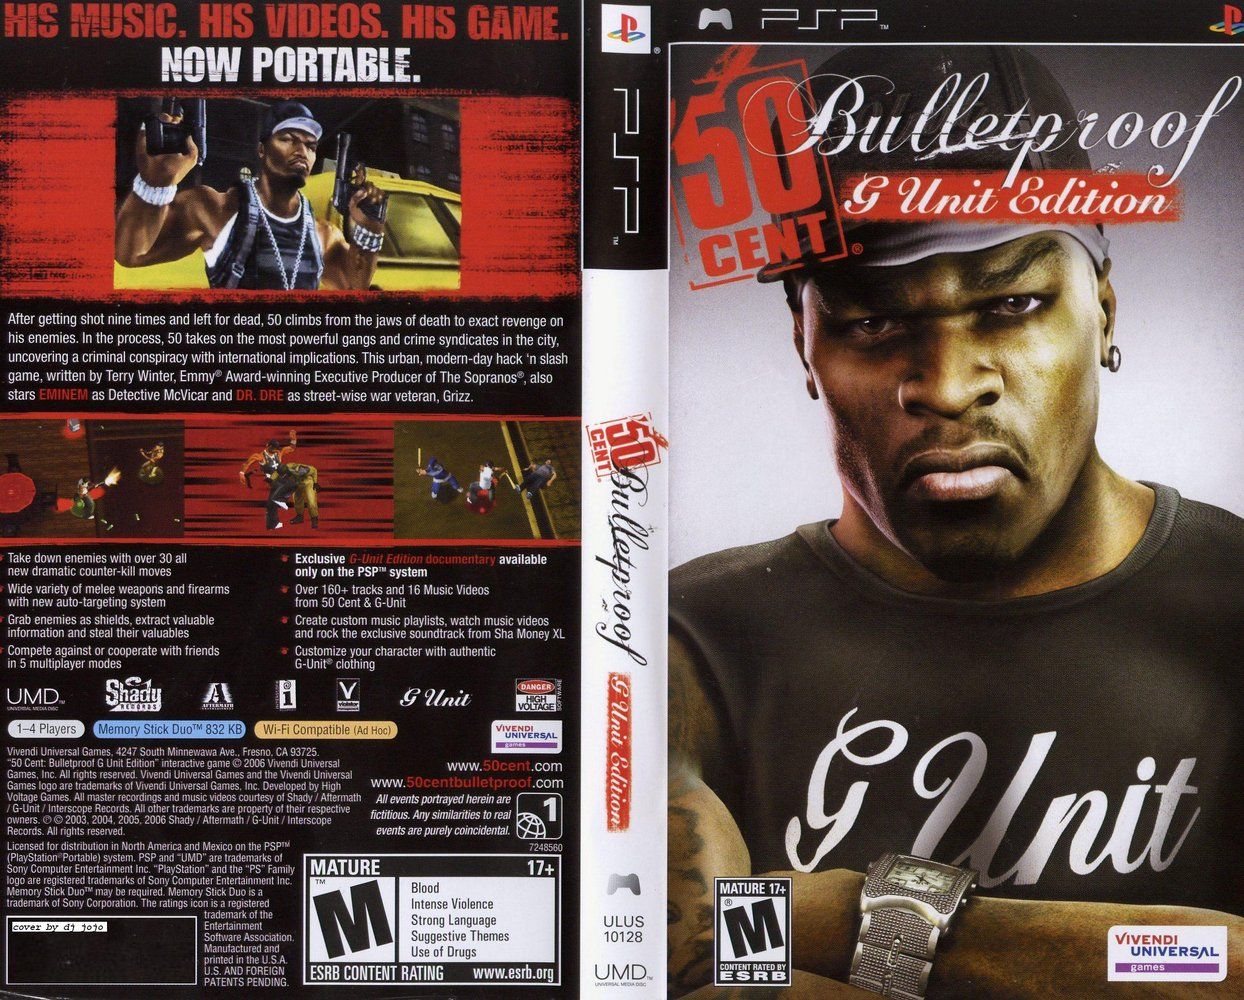 50 cent bulletproof pc game download - songspikol